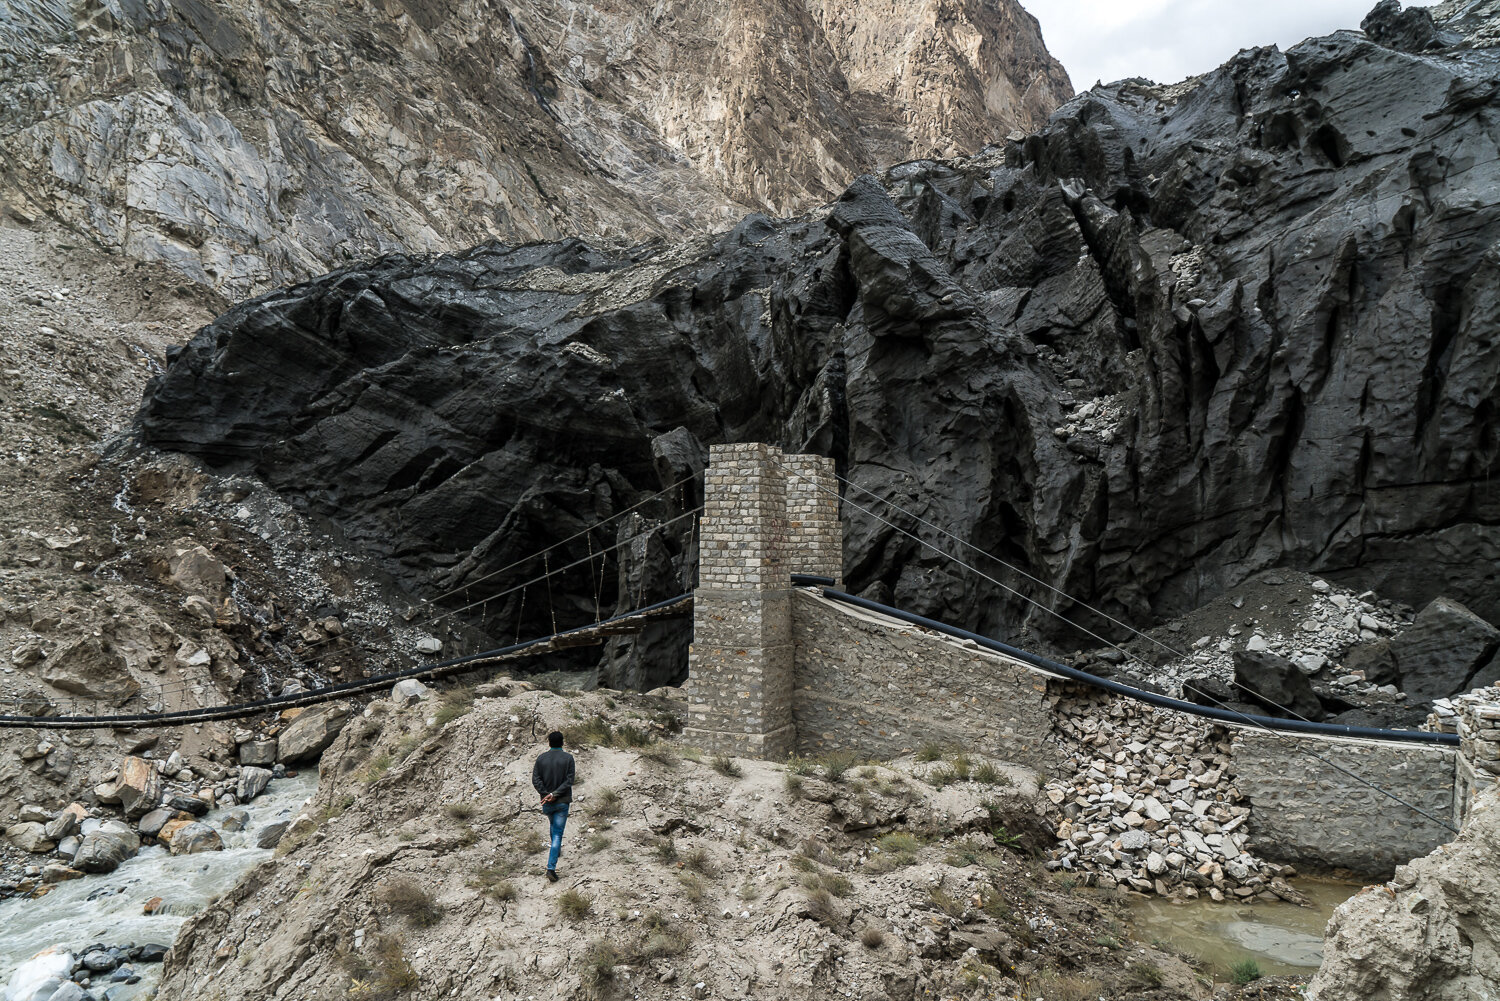  Majeed Ullahbaig walks to a bridge located in front of the Shisper glacier on Friday, October 4, 2019 in Hasanabad, Gilgit-Baltistan, Pakistan. The glacier provides water for drinking and irrigation, but has recently surged downhill substantially, r